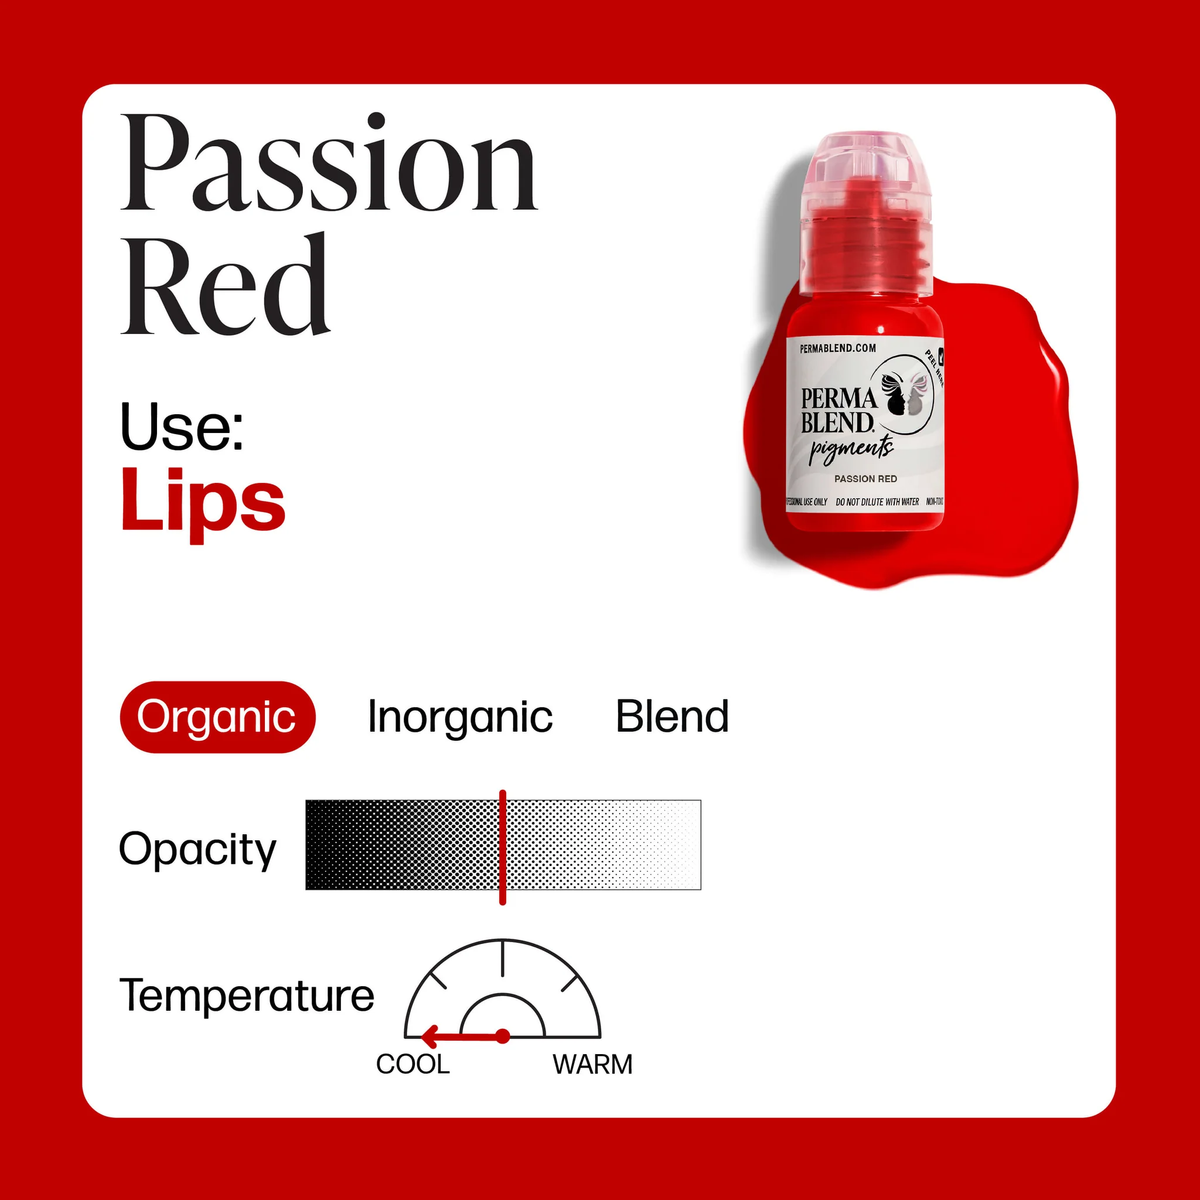 Passion Red - Perma Blend Pigment